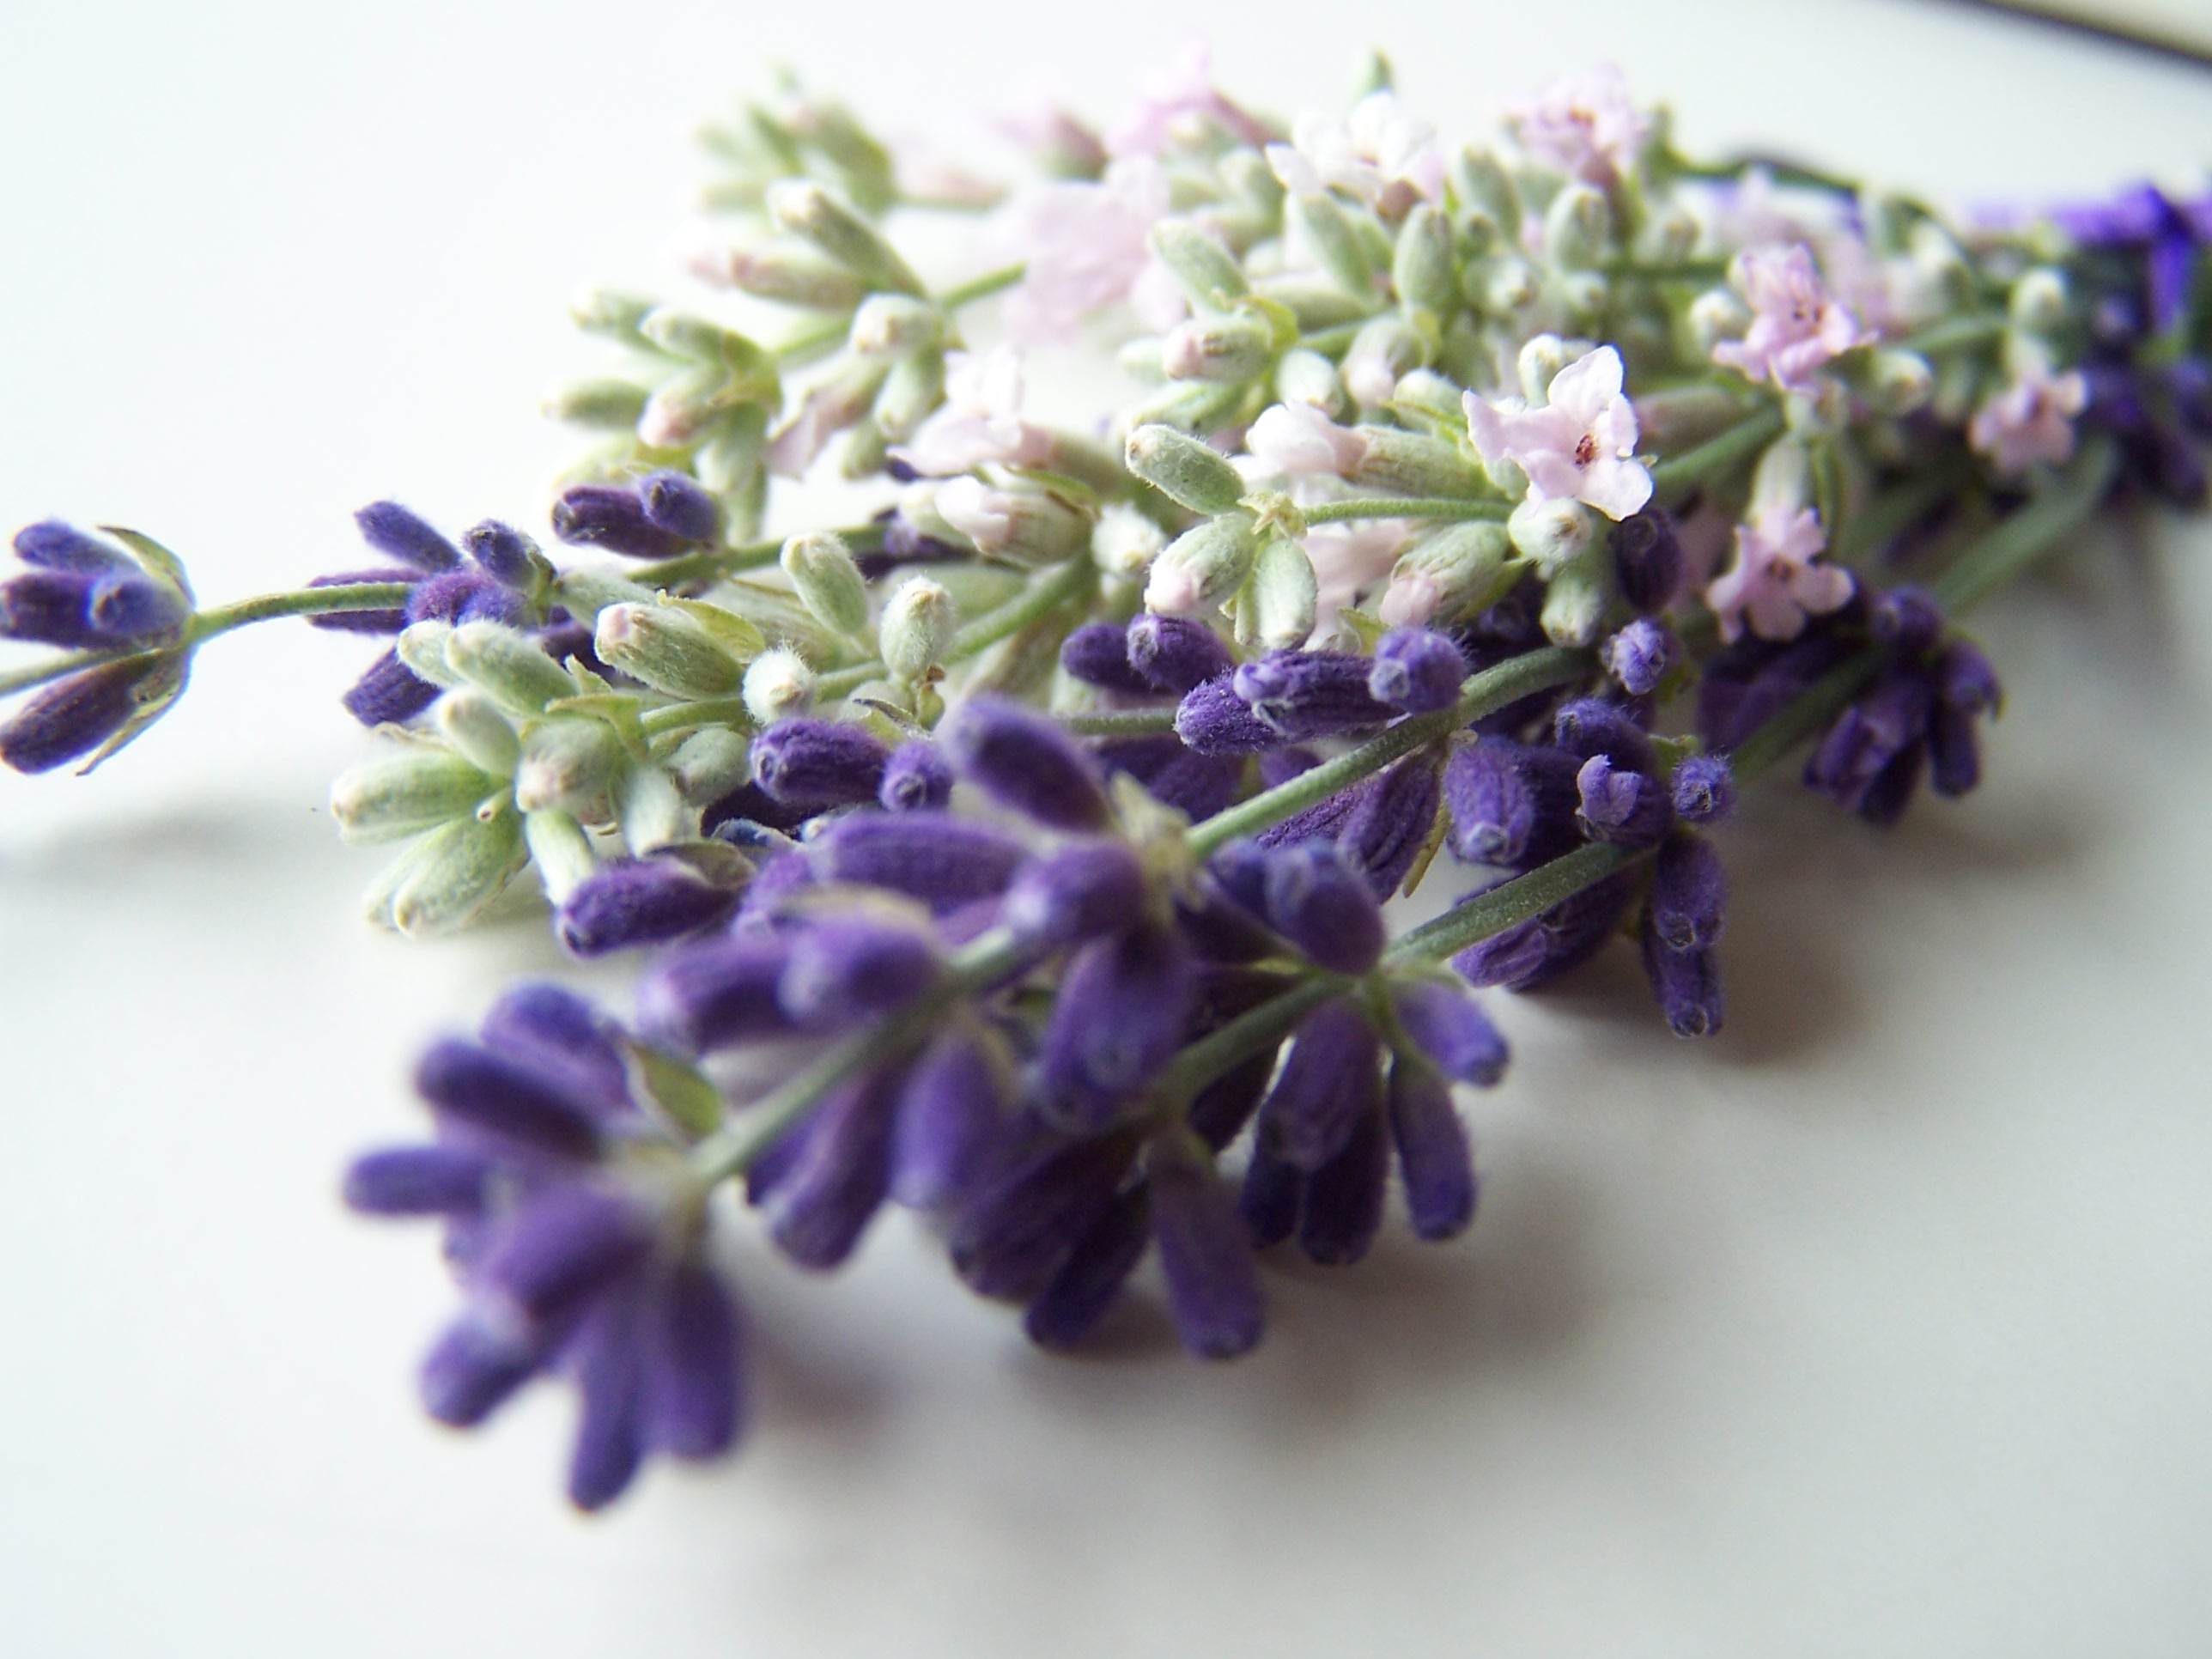 Cooking With Lavender Is Dependent Upon The Variety Used